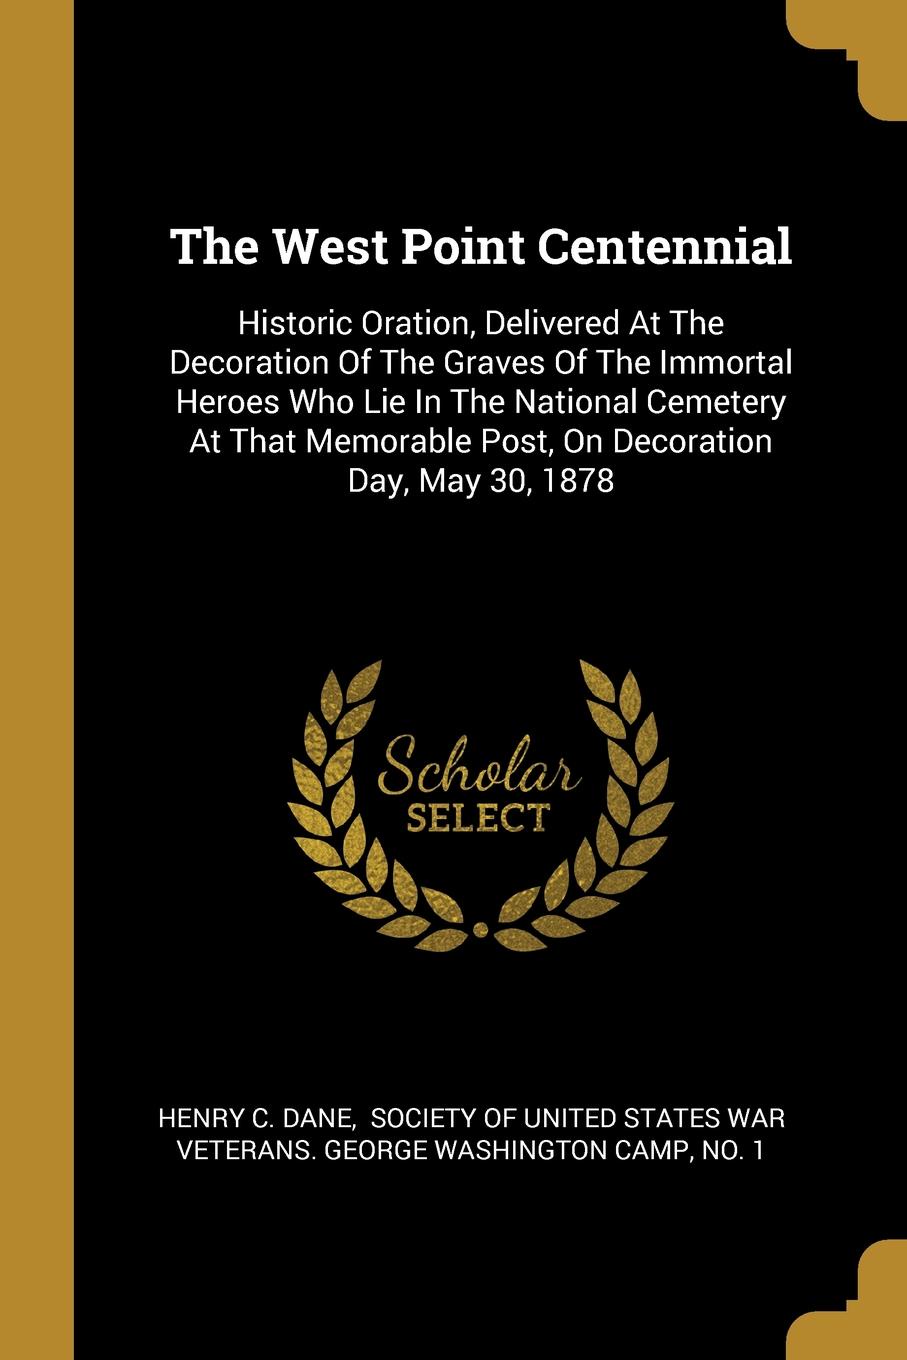 The West Point Centennial. Historic Oration, Delivered At The Decoration Of The Graves Of The Immortal Heroes Who Lie In The National Cemetery At That Memorable Post, On Decoration Day, May 30, 1878